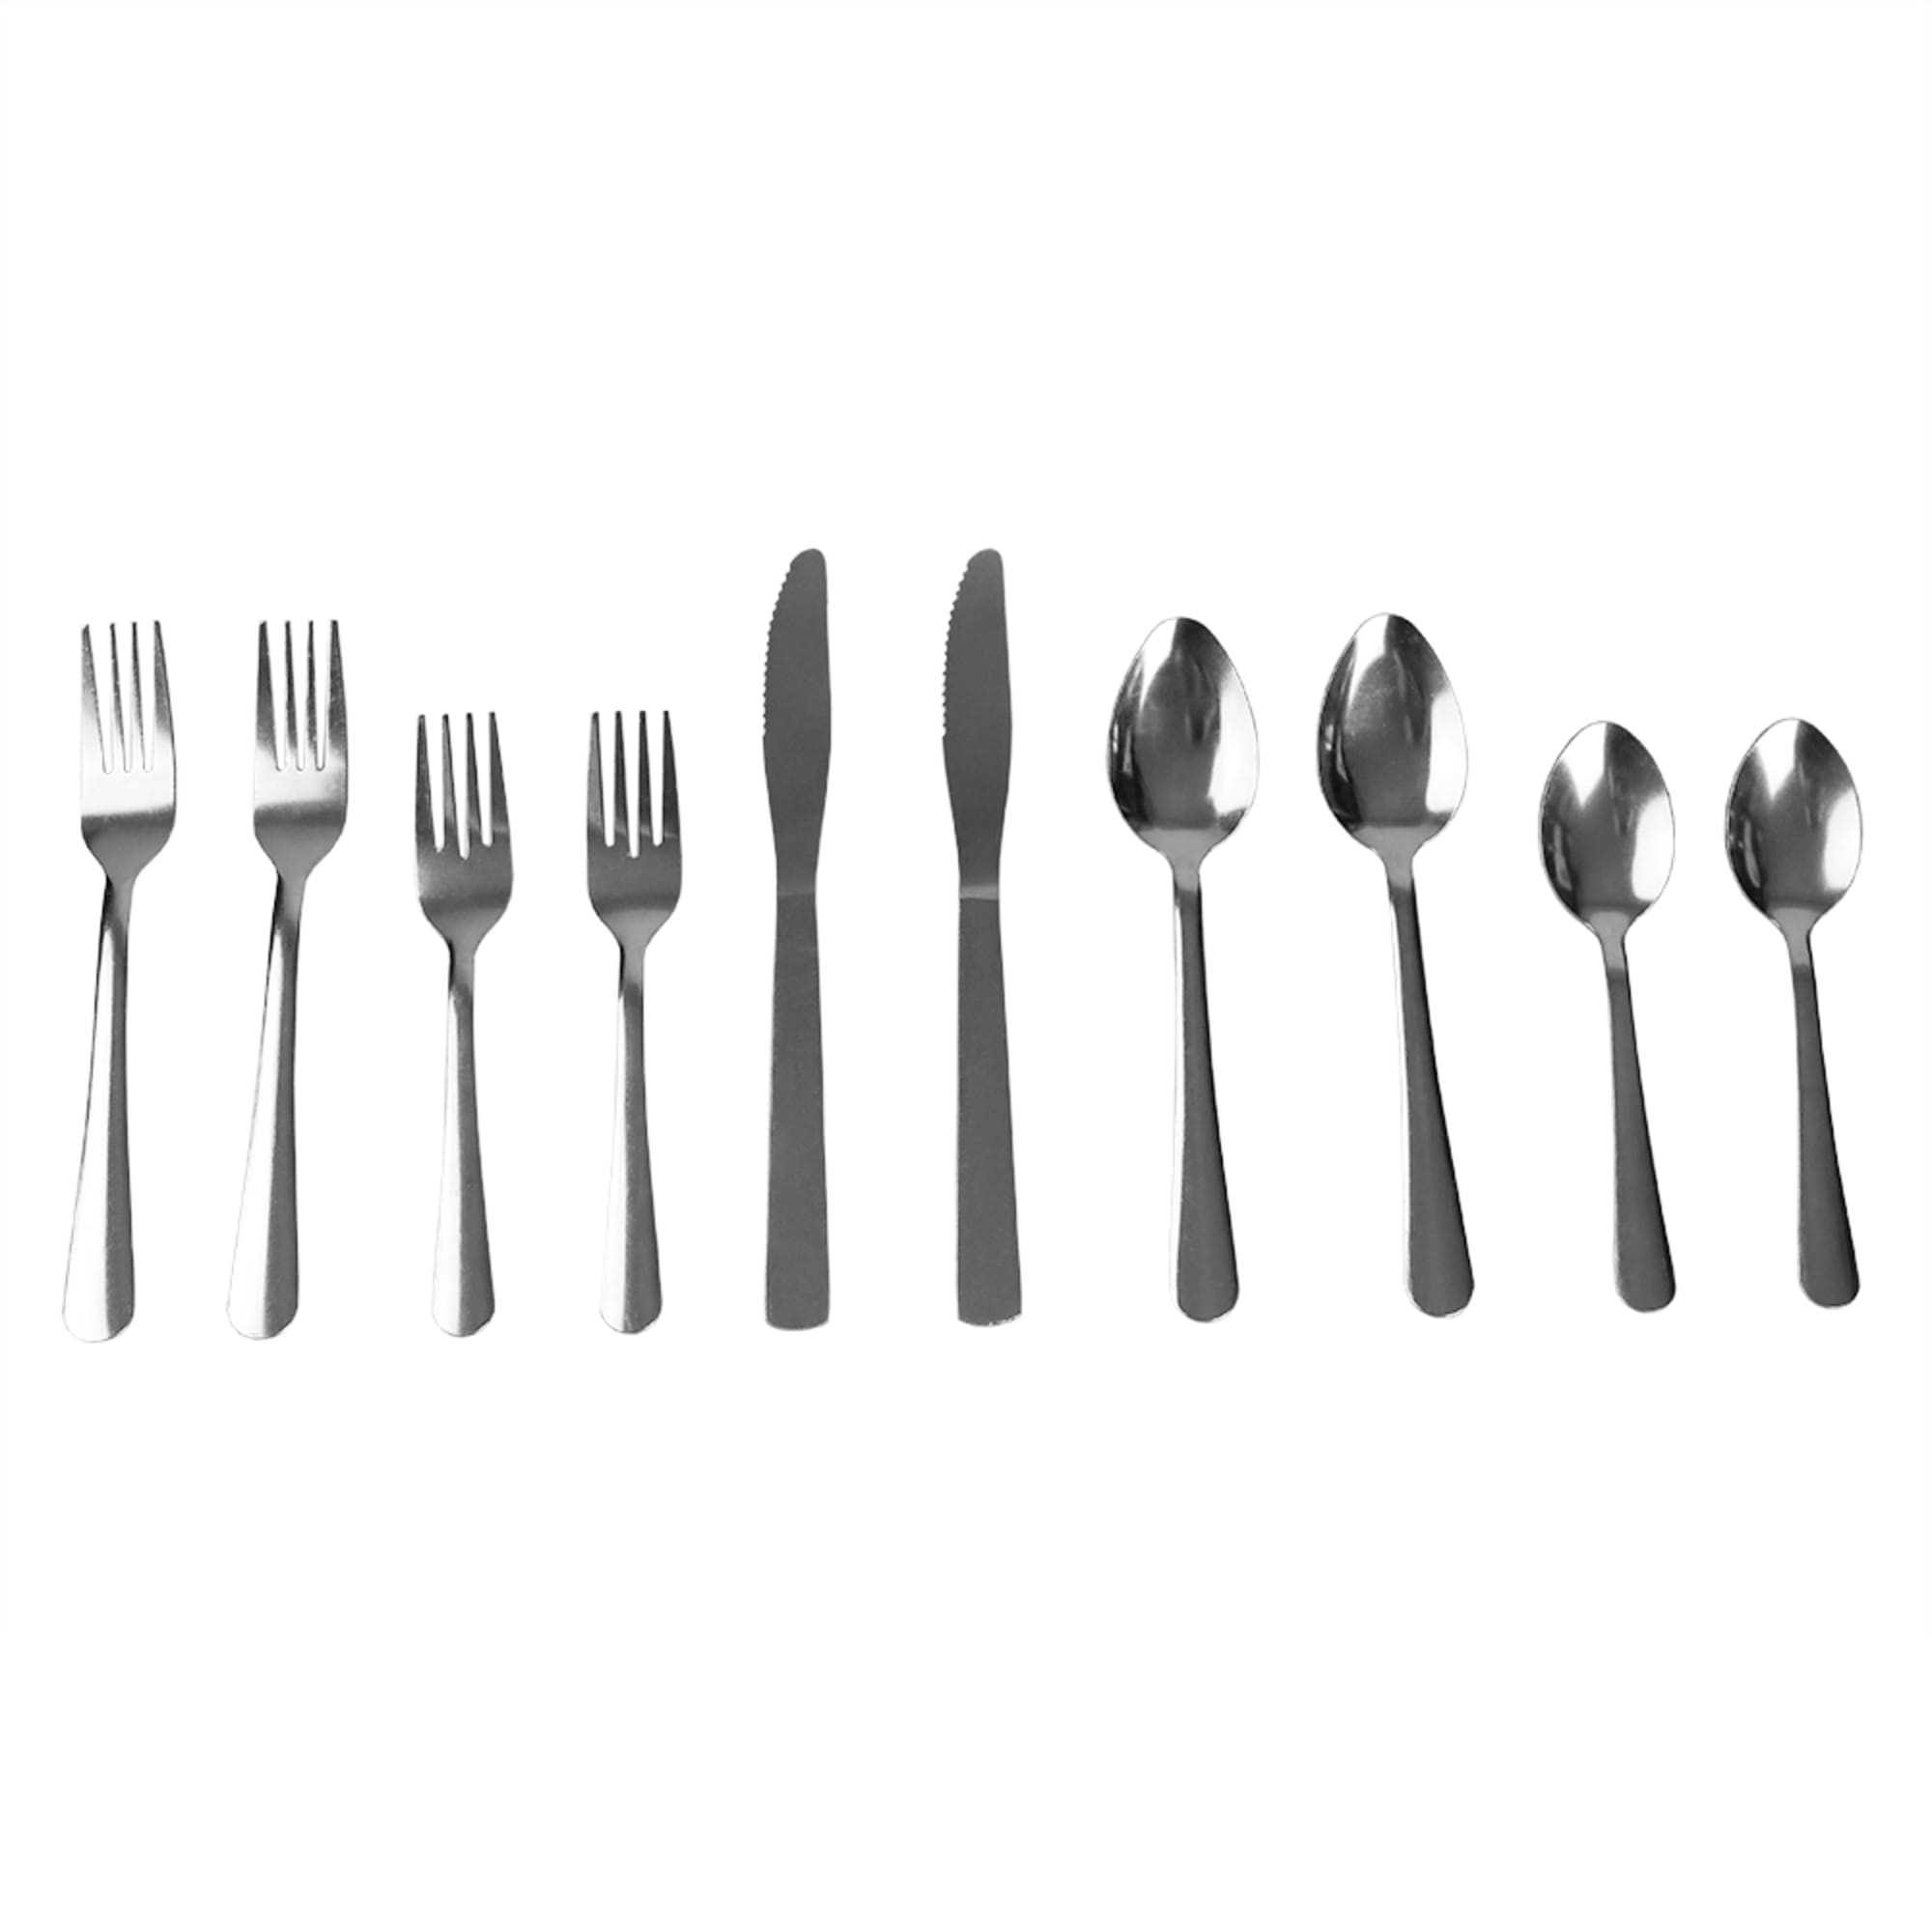 Home Basics Elle 20 Piece Stainless Steel Flatware Set, Silver $8.00 EACH, CASE PACK OF 12